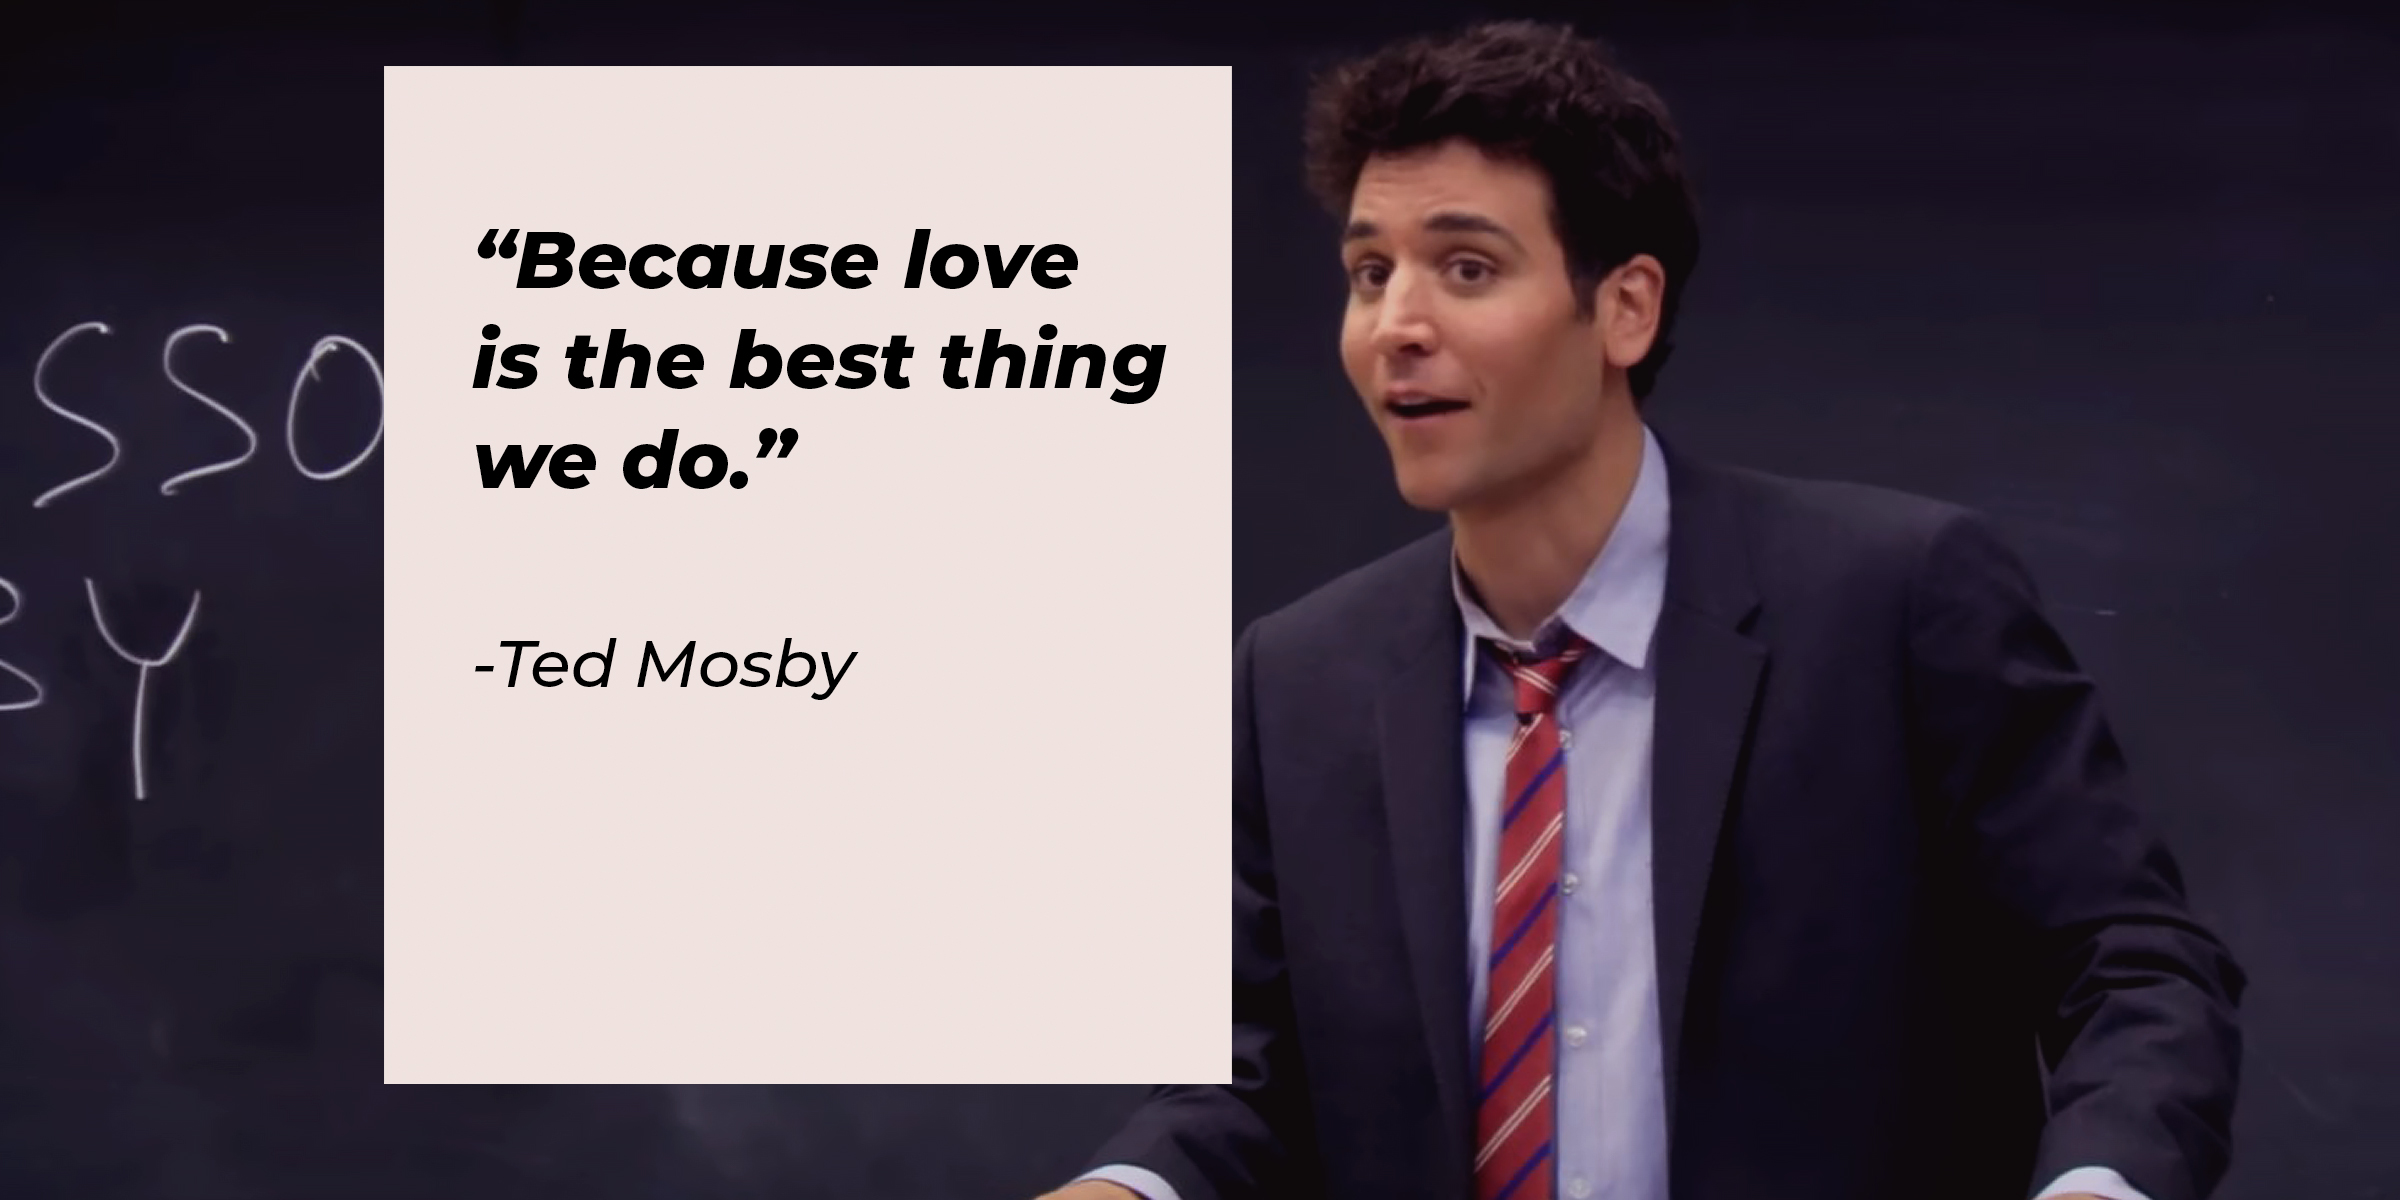 An image of Ted Mosby with his quote: “Because love is the best thing we do.” | Source: facebook.com/OfficialHowIMetYourMother